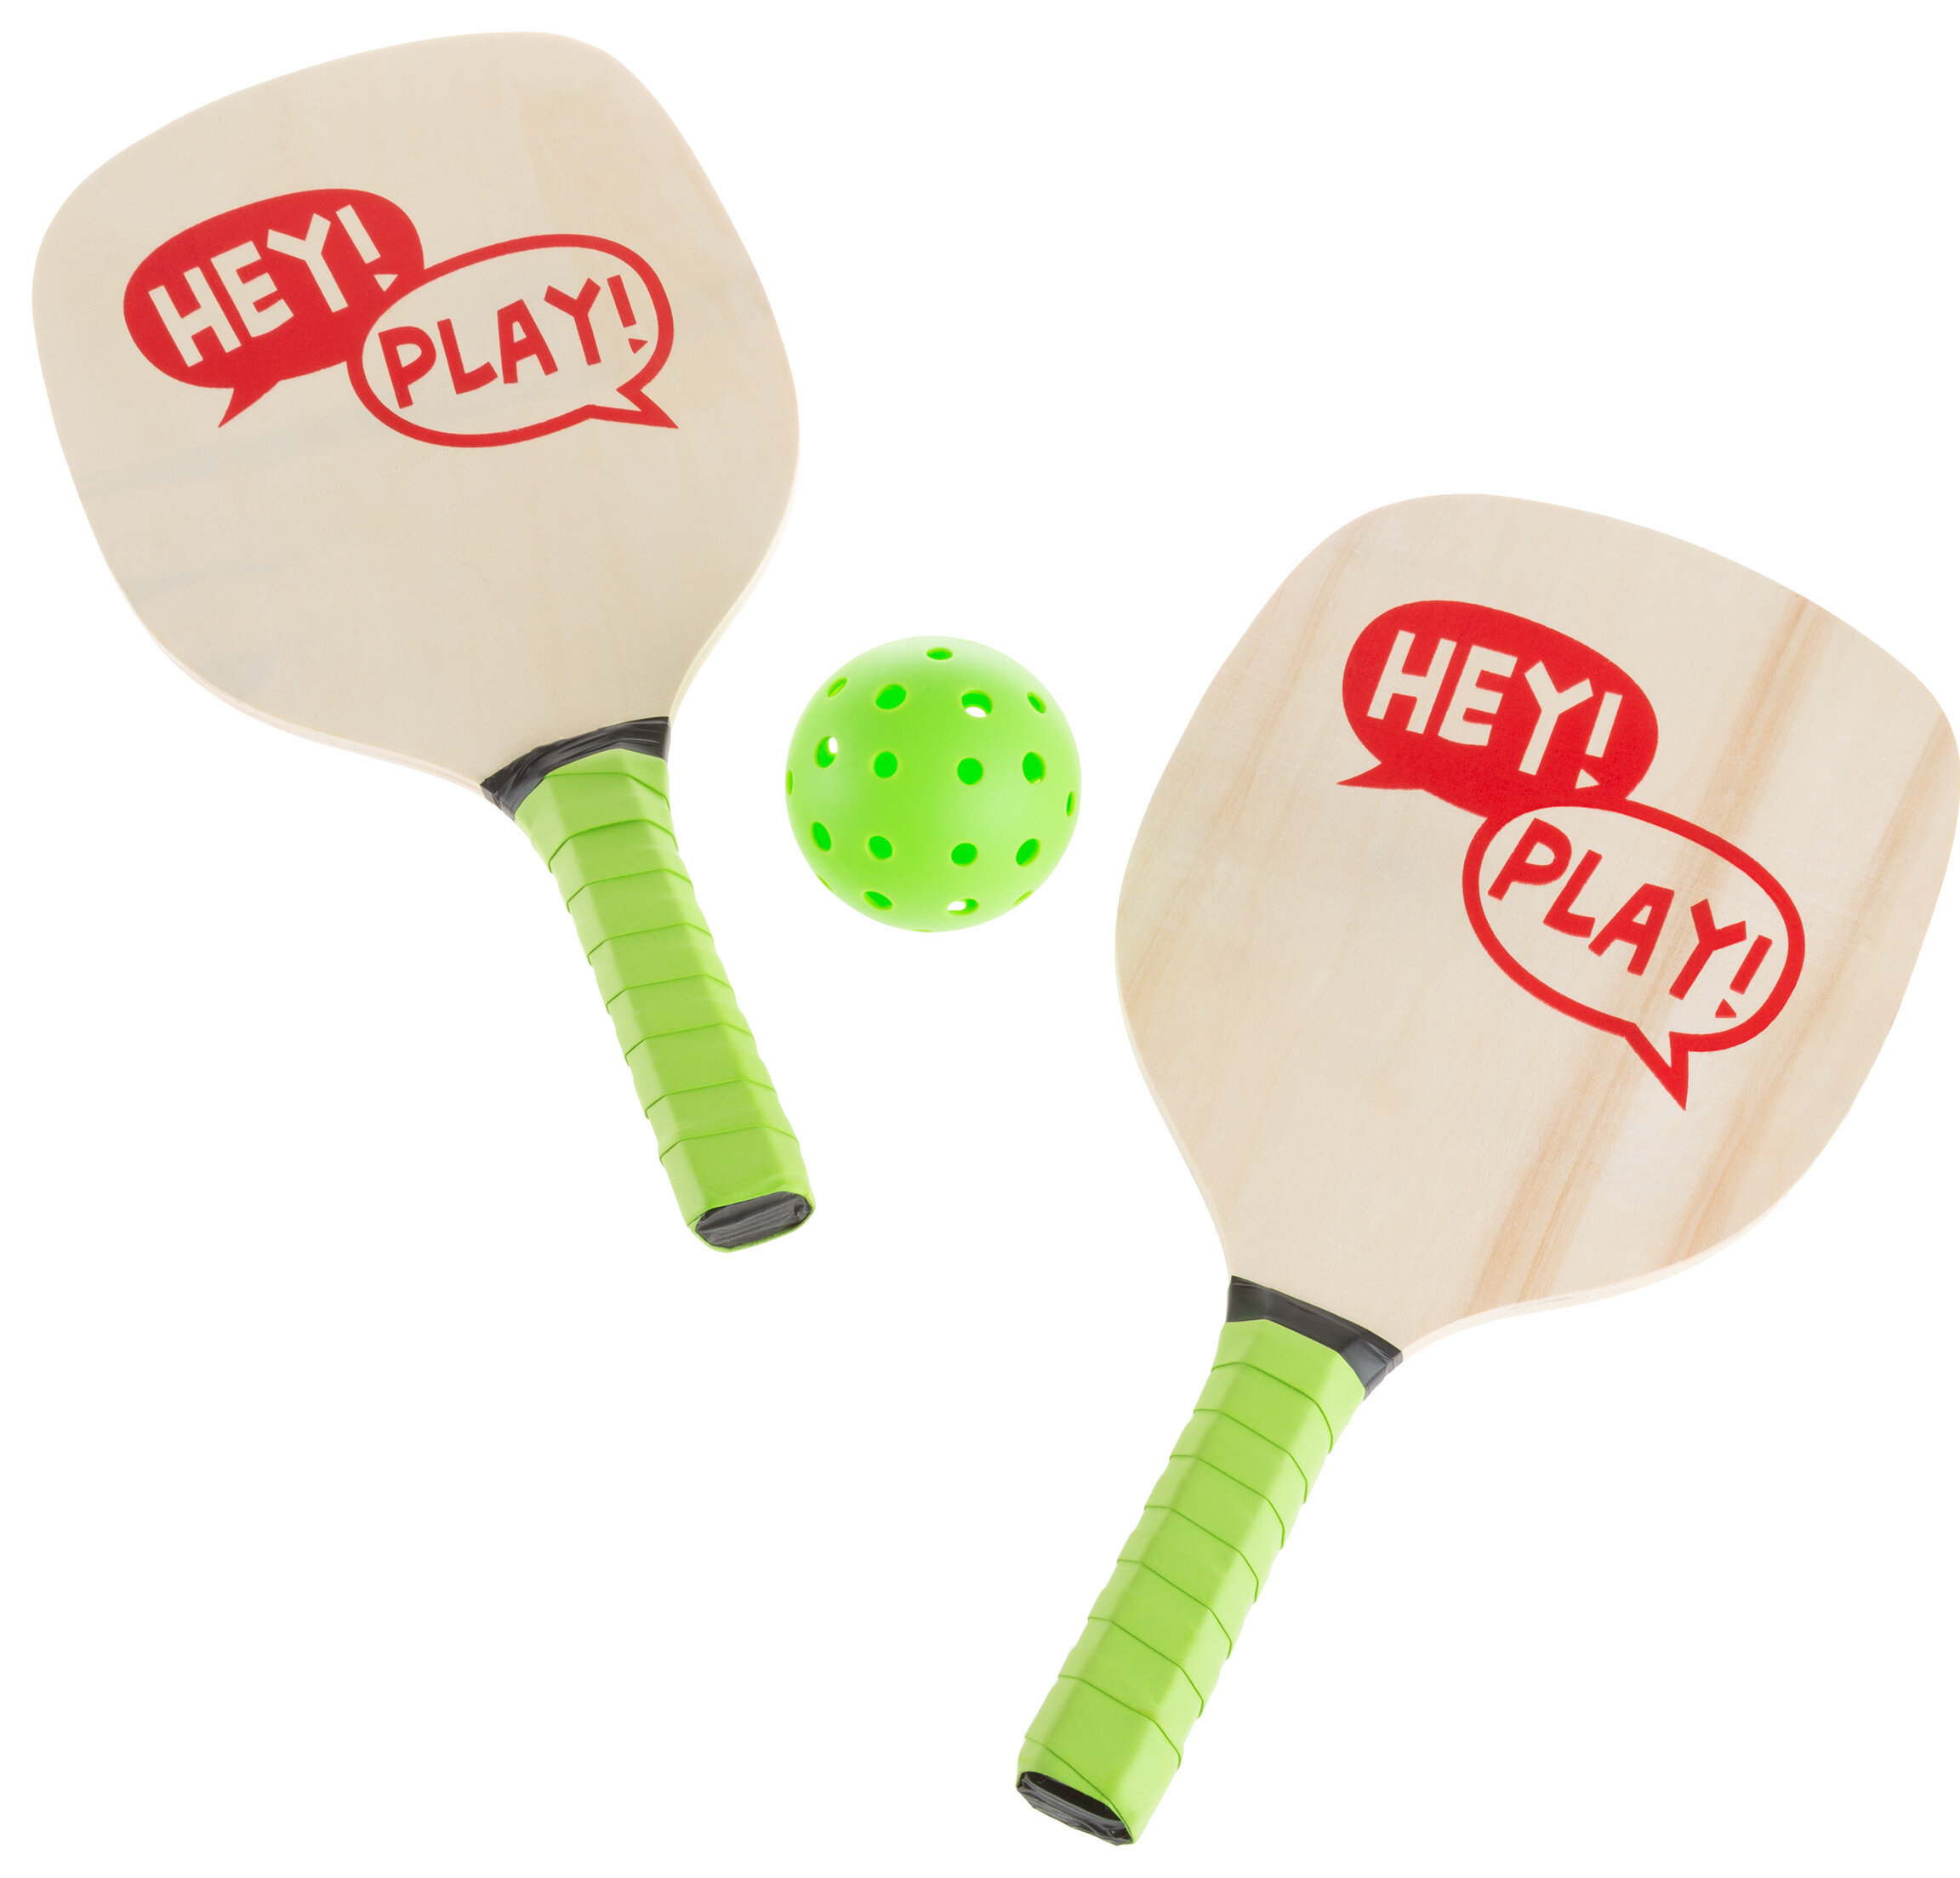 Hey! Play! Solid Wood Paddle Ball with Carrying Case & Reviews